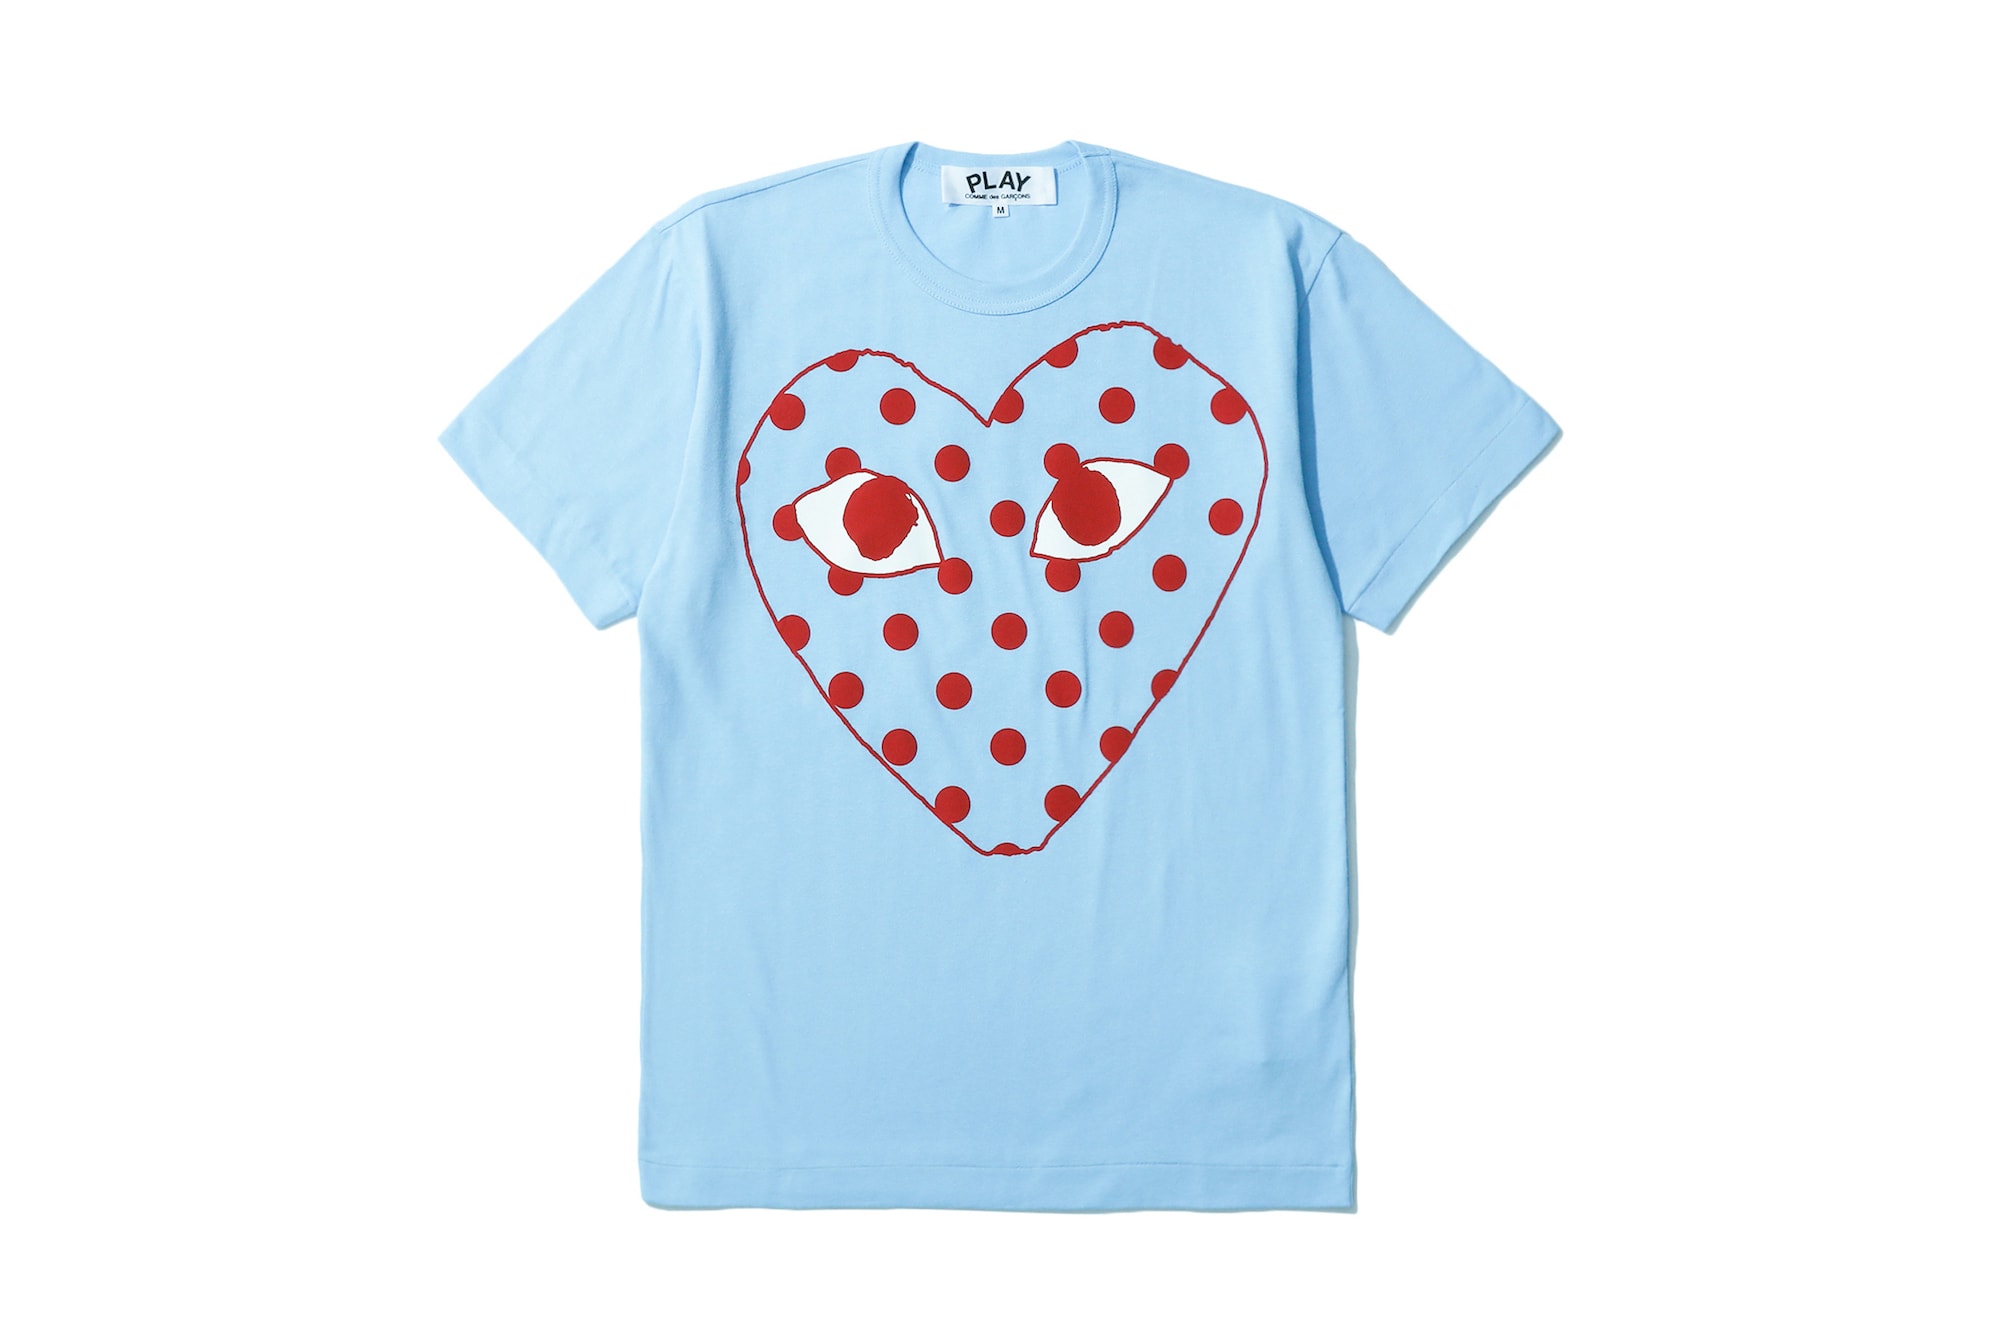 COMME des GARÇONS PLAY Spring/Summer Collection Pink Green Blue Pastel Graphics Print